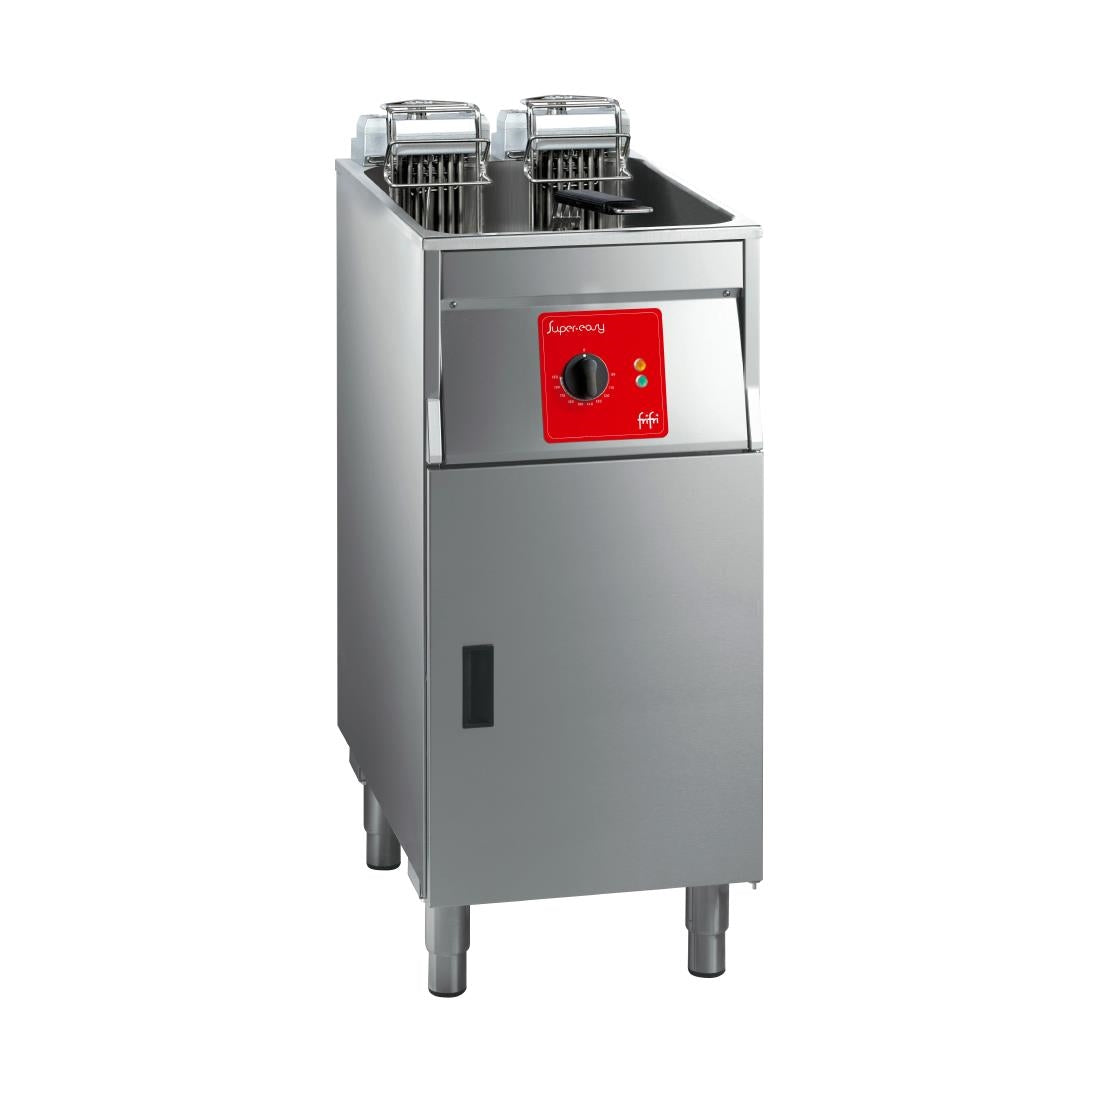 HS058-3PH FriFri Super Easy 411 Electric Free-Standing Single Tank Fryer without Filtration 1 Basket 22kW - Three Phase